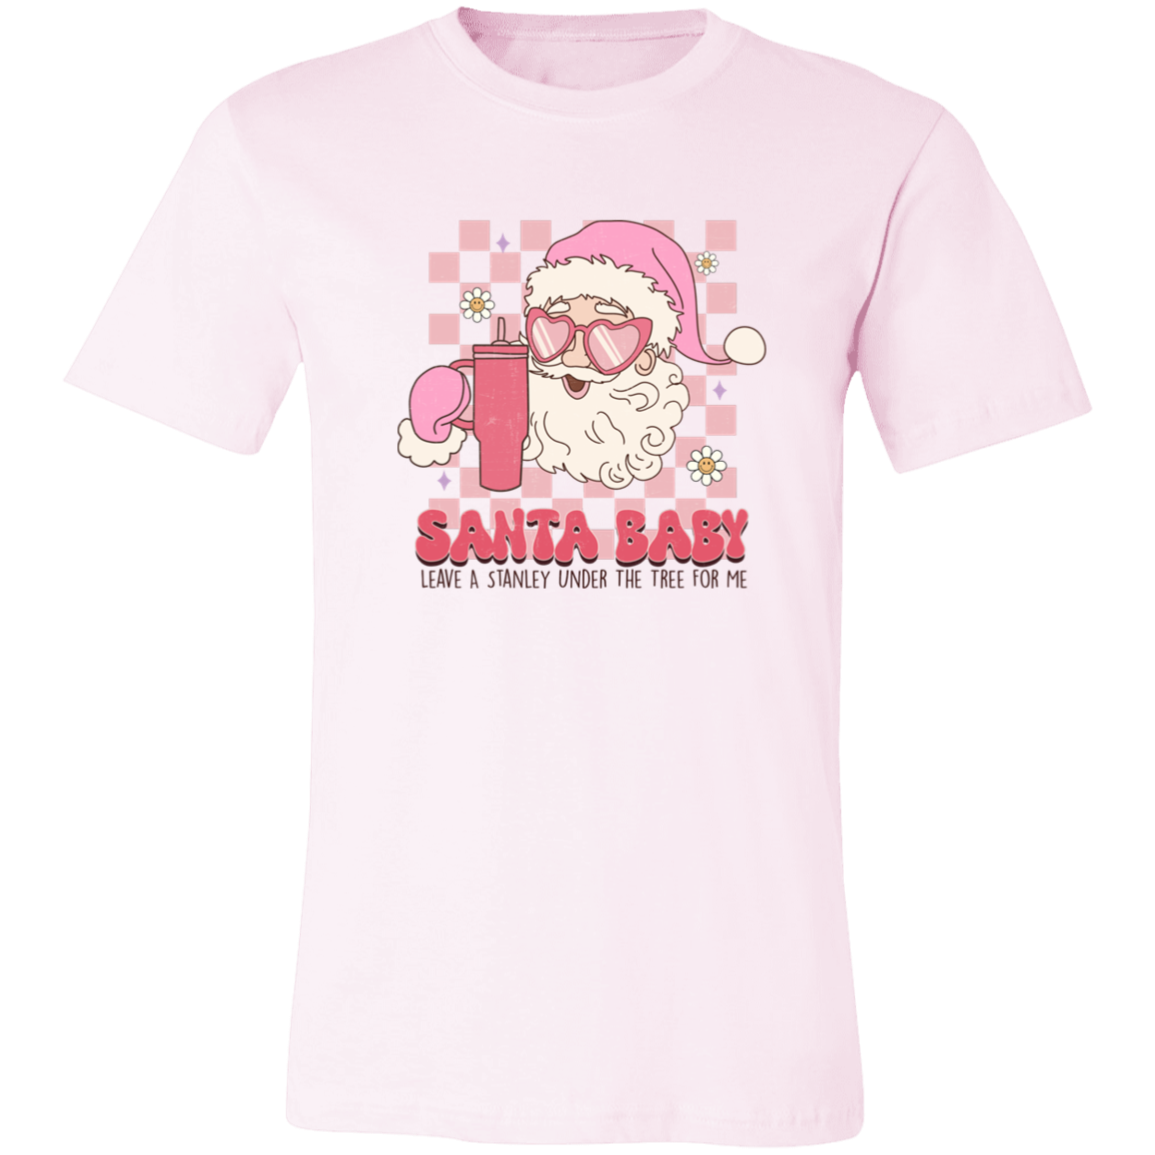 Santa Baby Leave A Stanley Under The Tree For Me Shirt